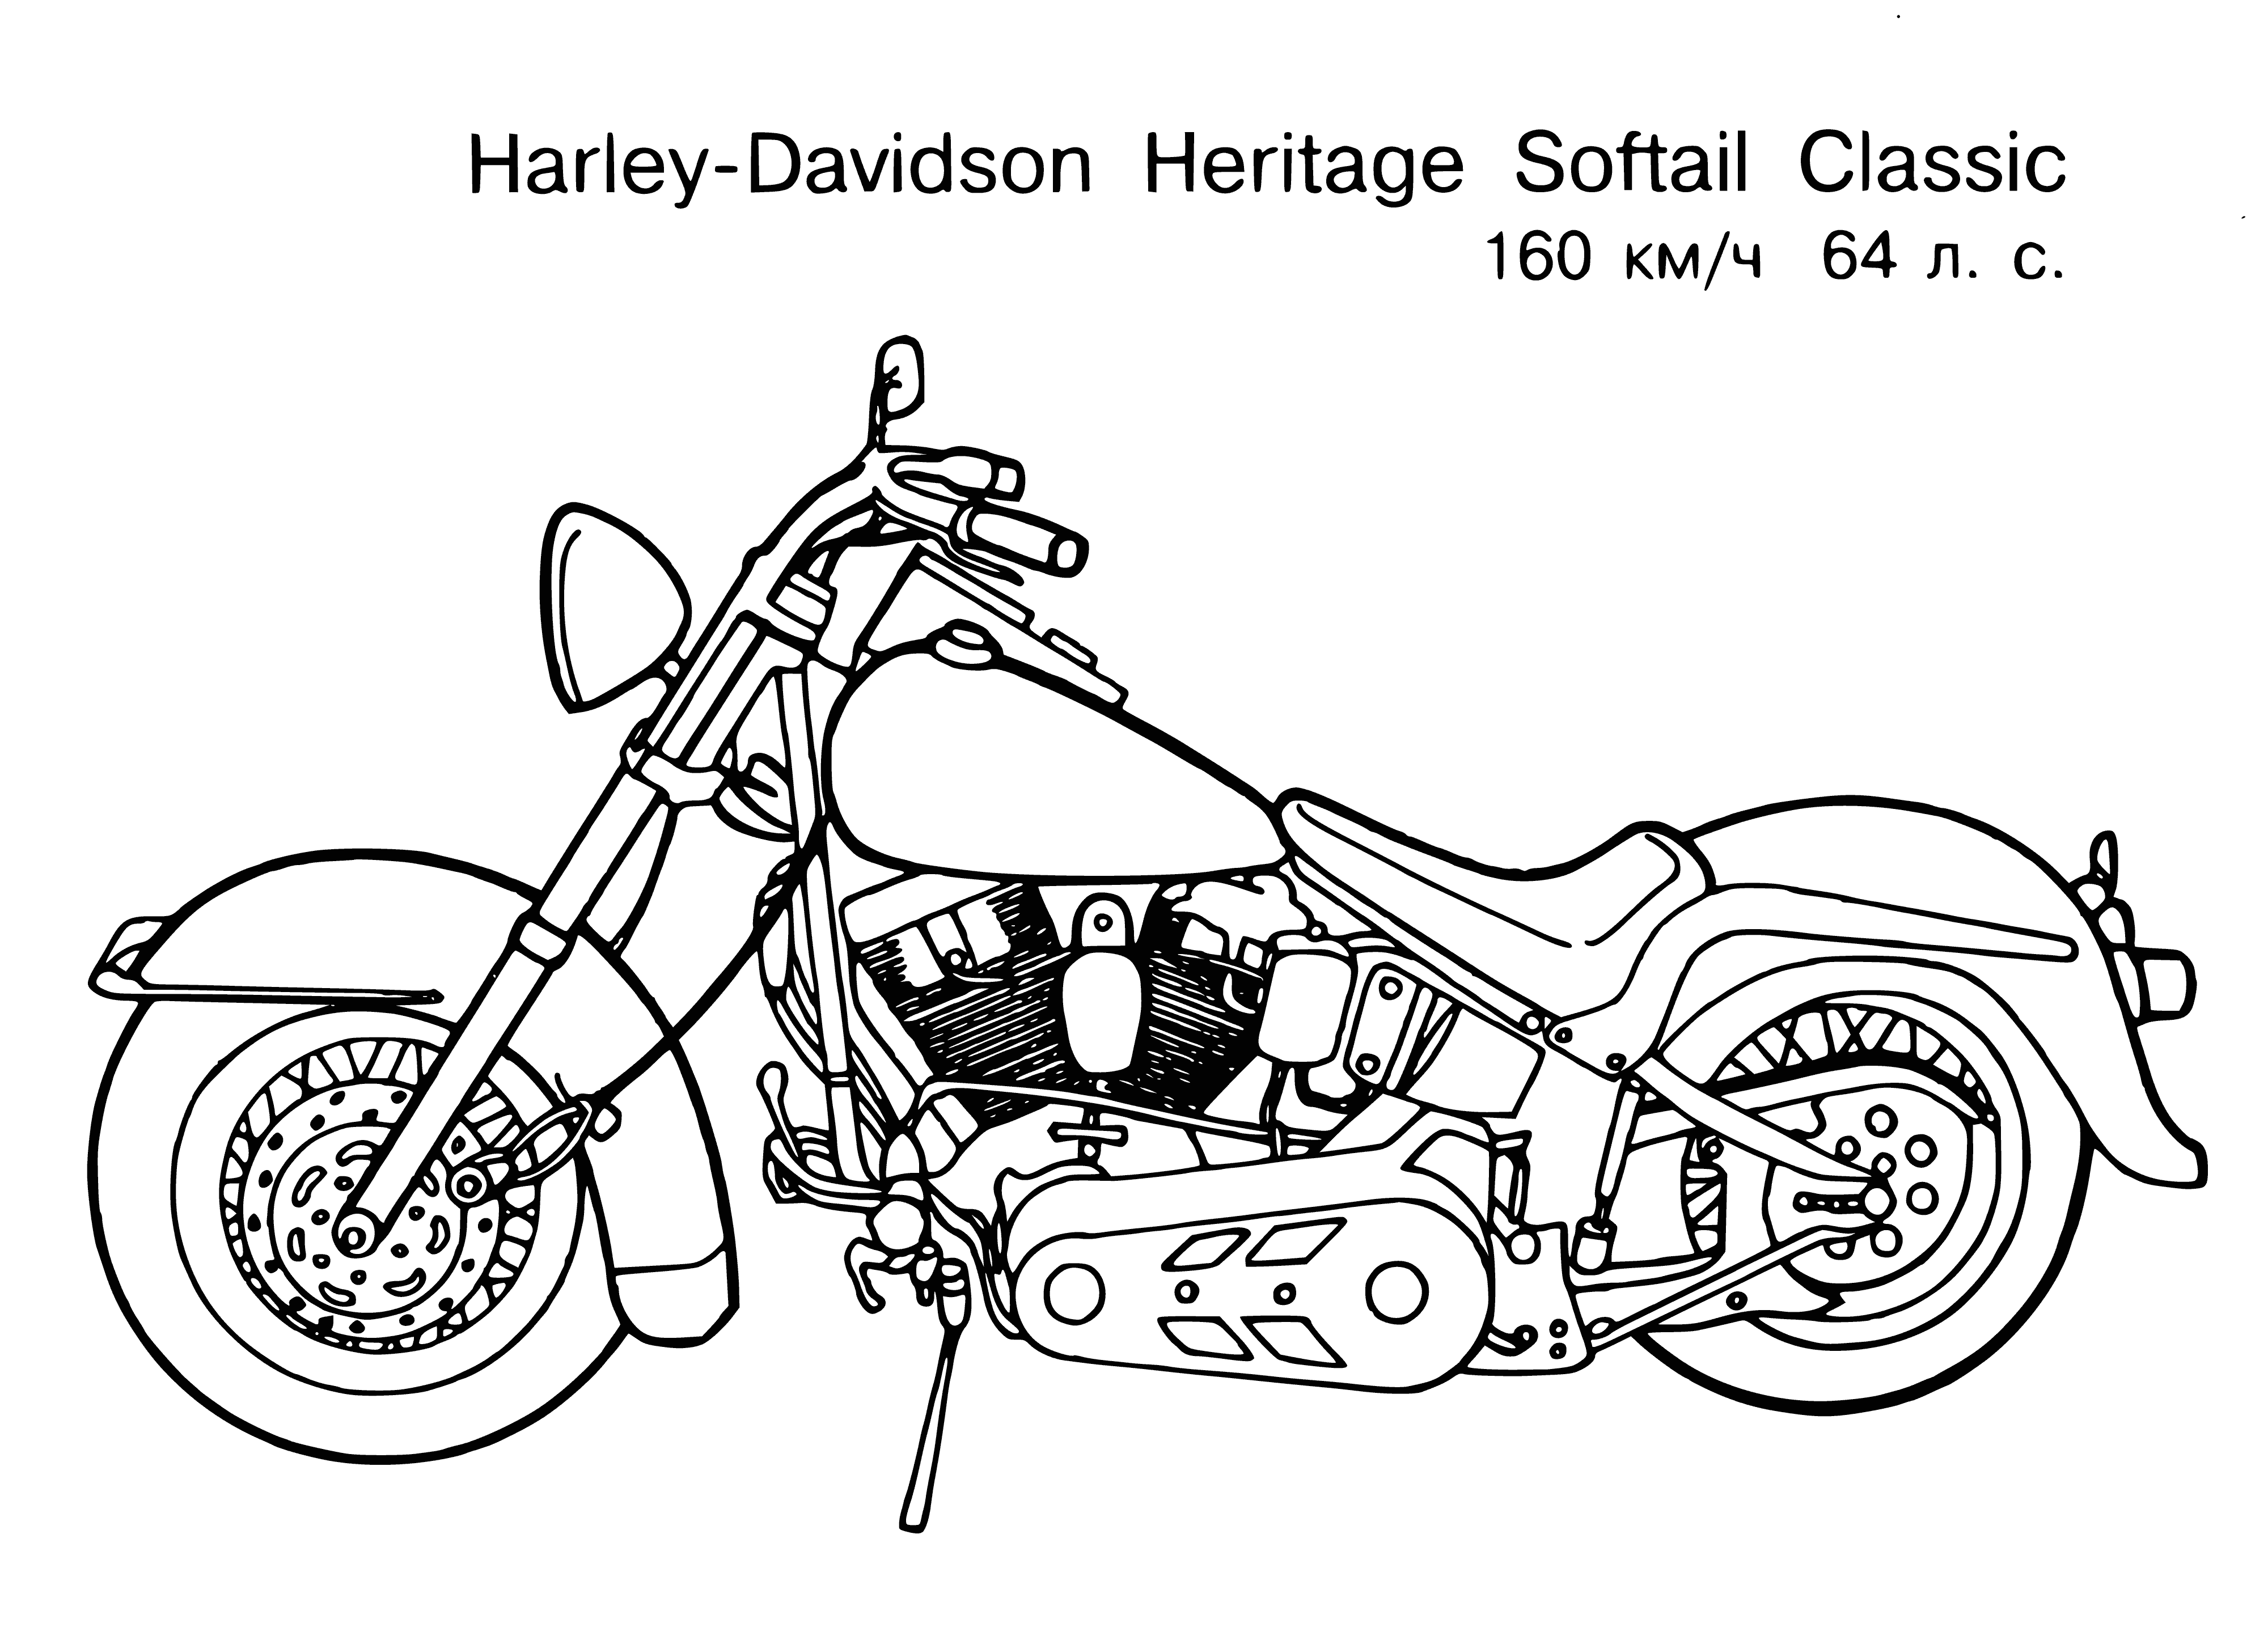 coloring page: Two-wheeled motor vehicle with an engine. Popular transport since early 1900s; loved world-wide.